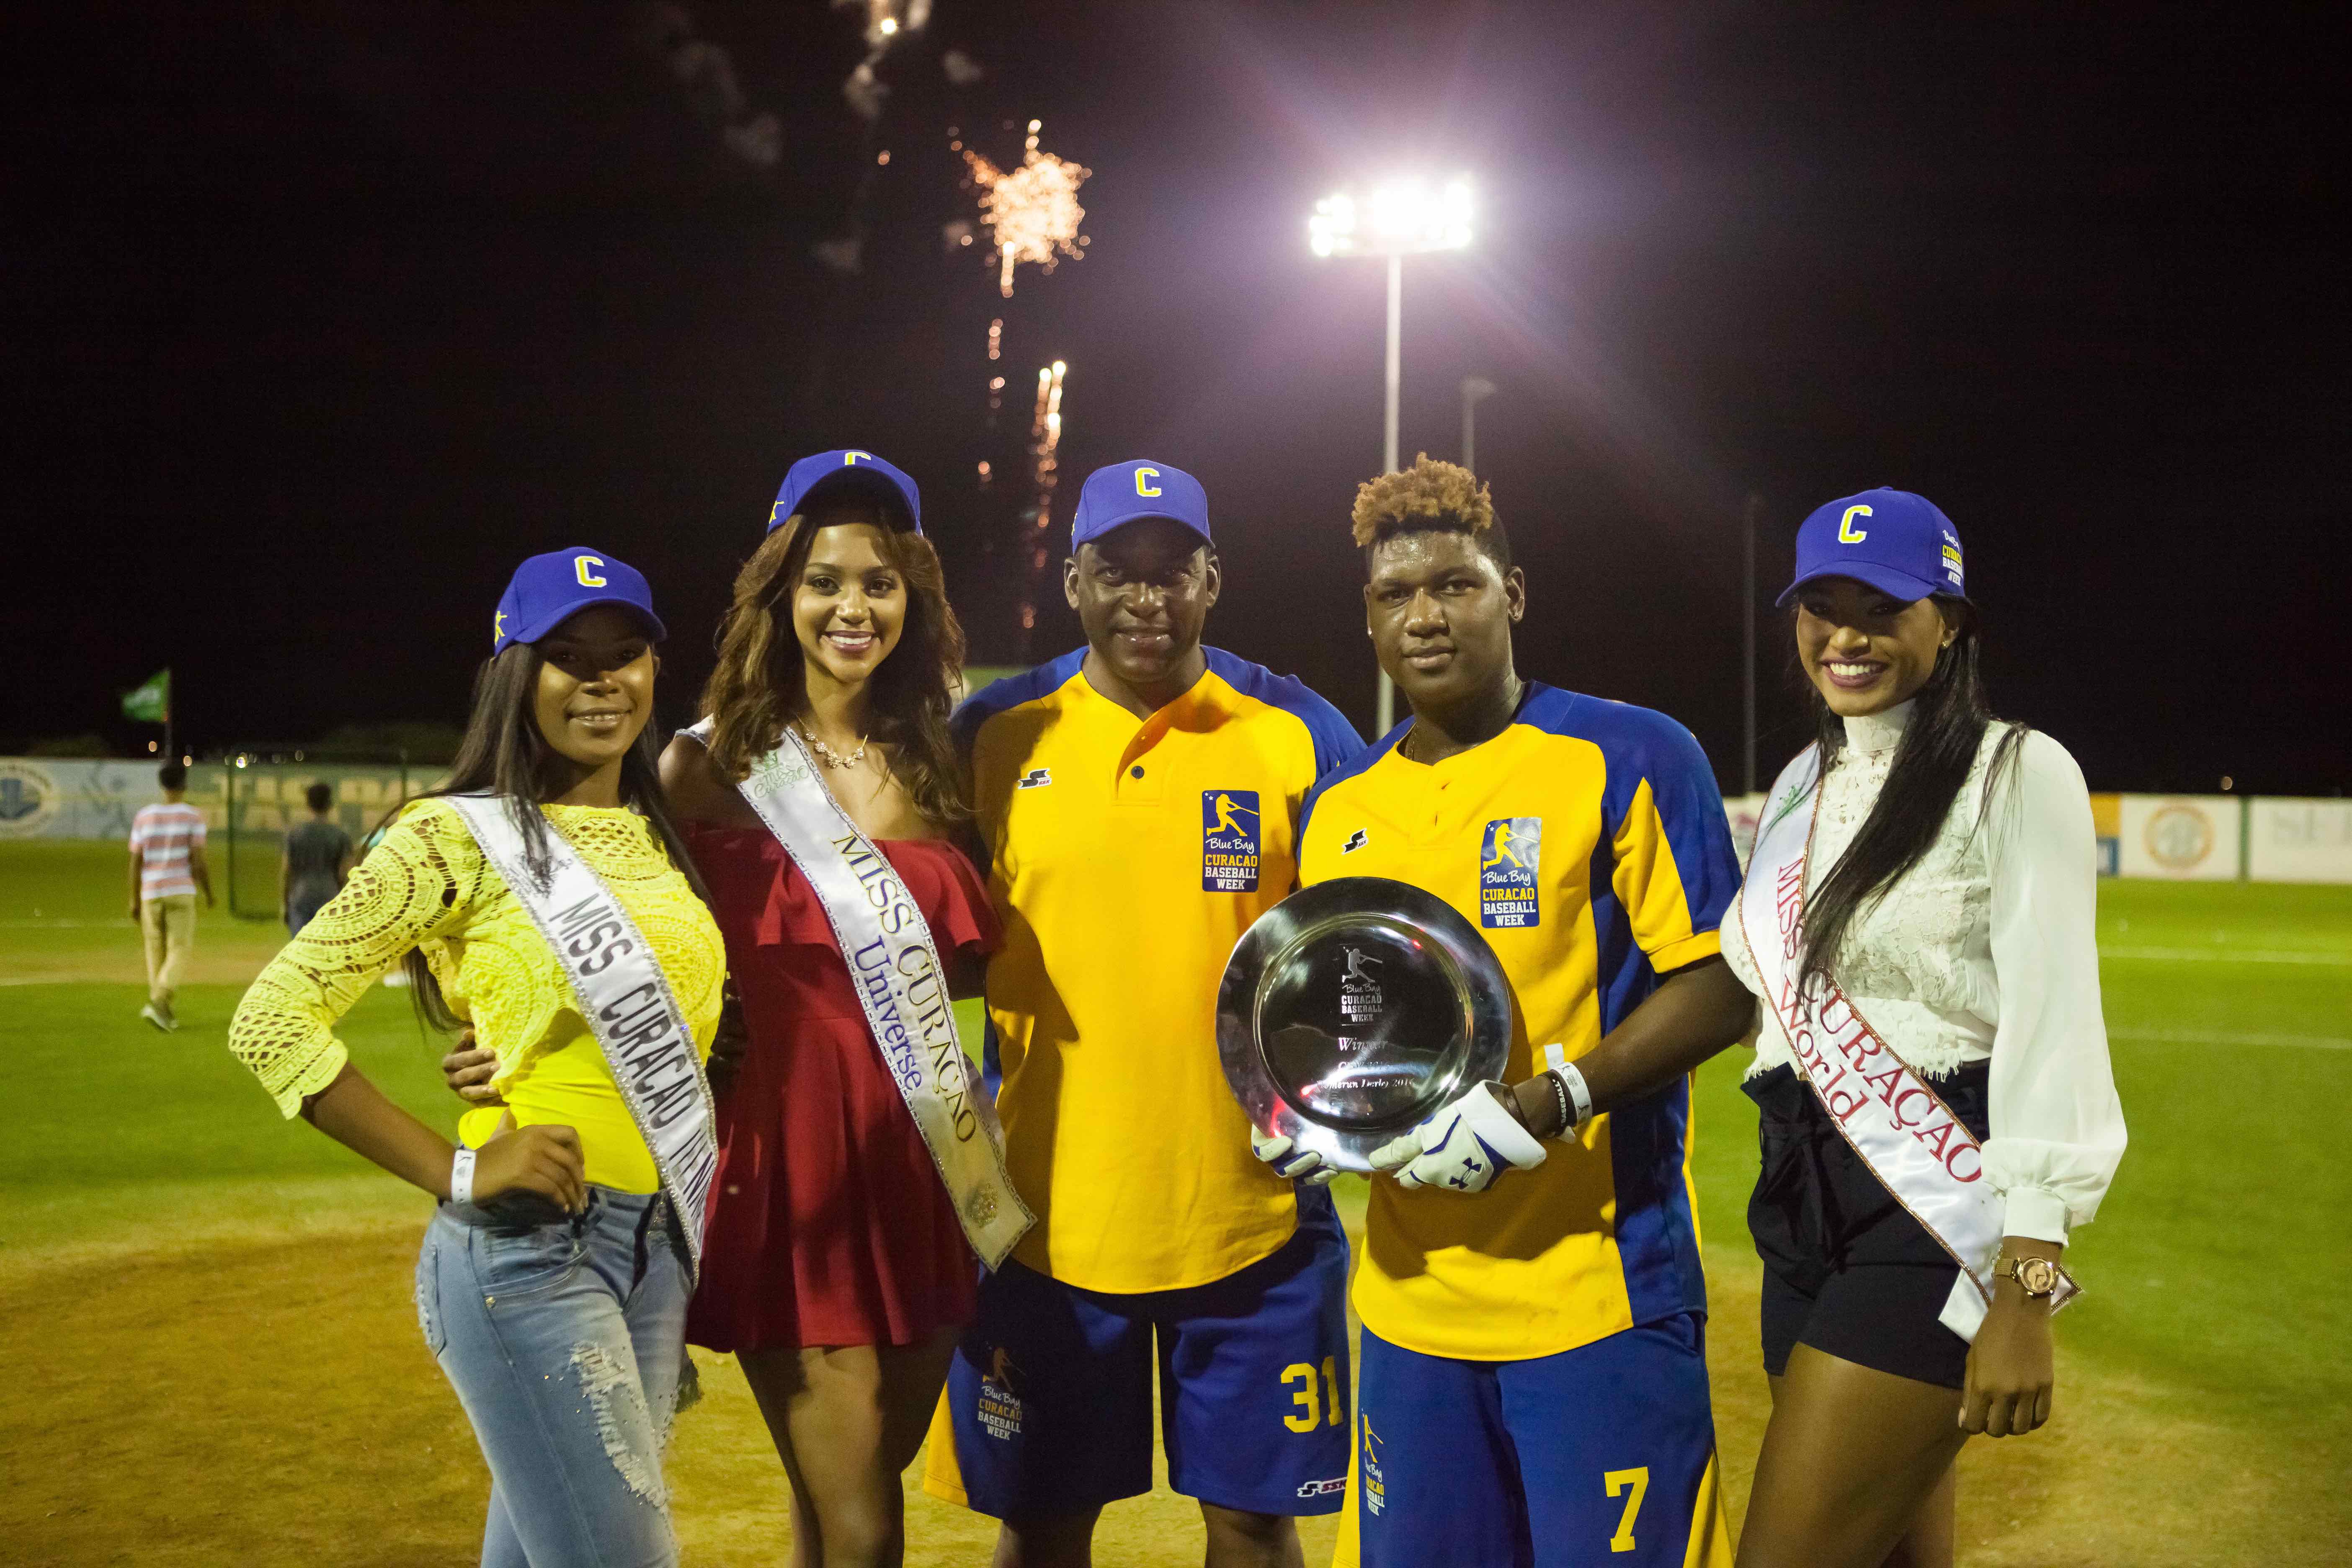 SPECTACULAIRE FINALE CURAÇAO BASEBALL WEEK 2016